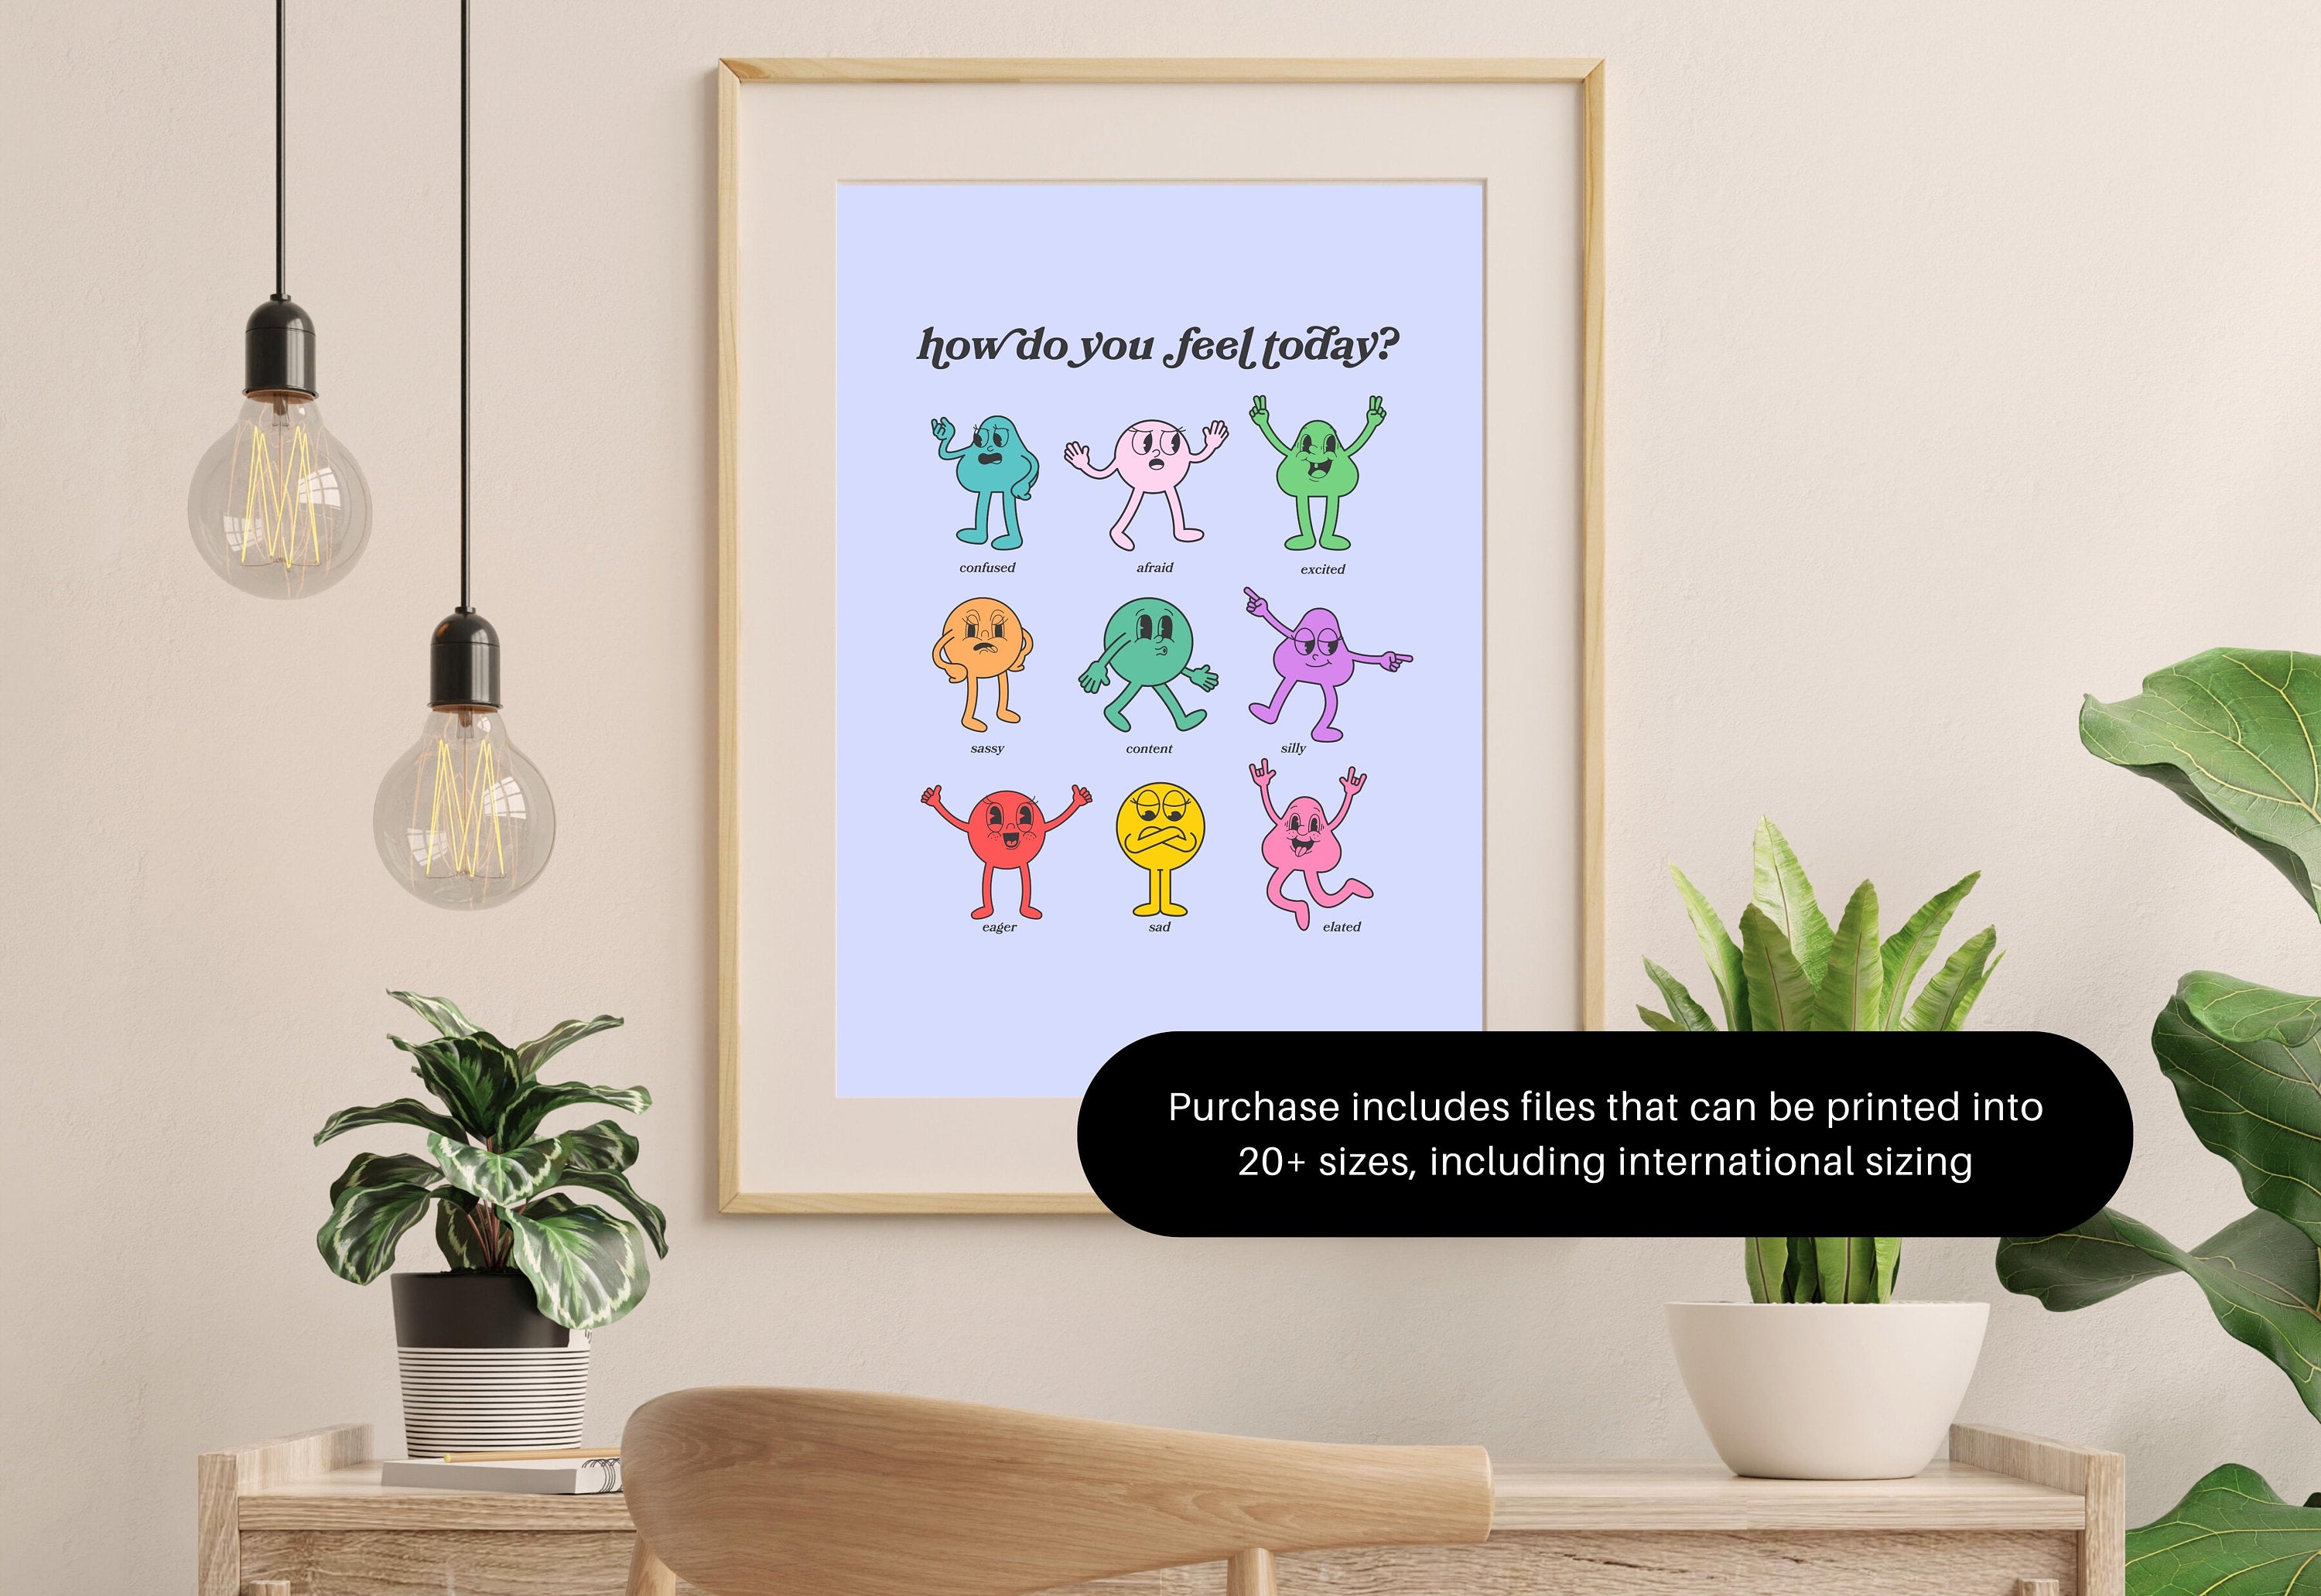 How Do You Feel Today? Retro Quote, Digital Prints Wall Art, Digital Prints, Emotions Art Prints, Mood and Feelings Poster, School Posters